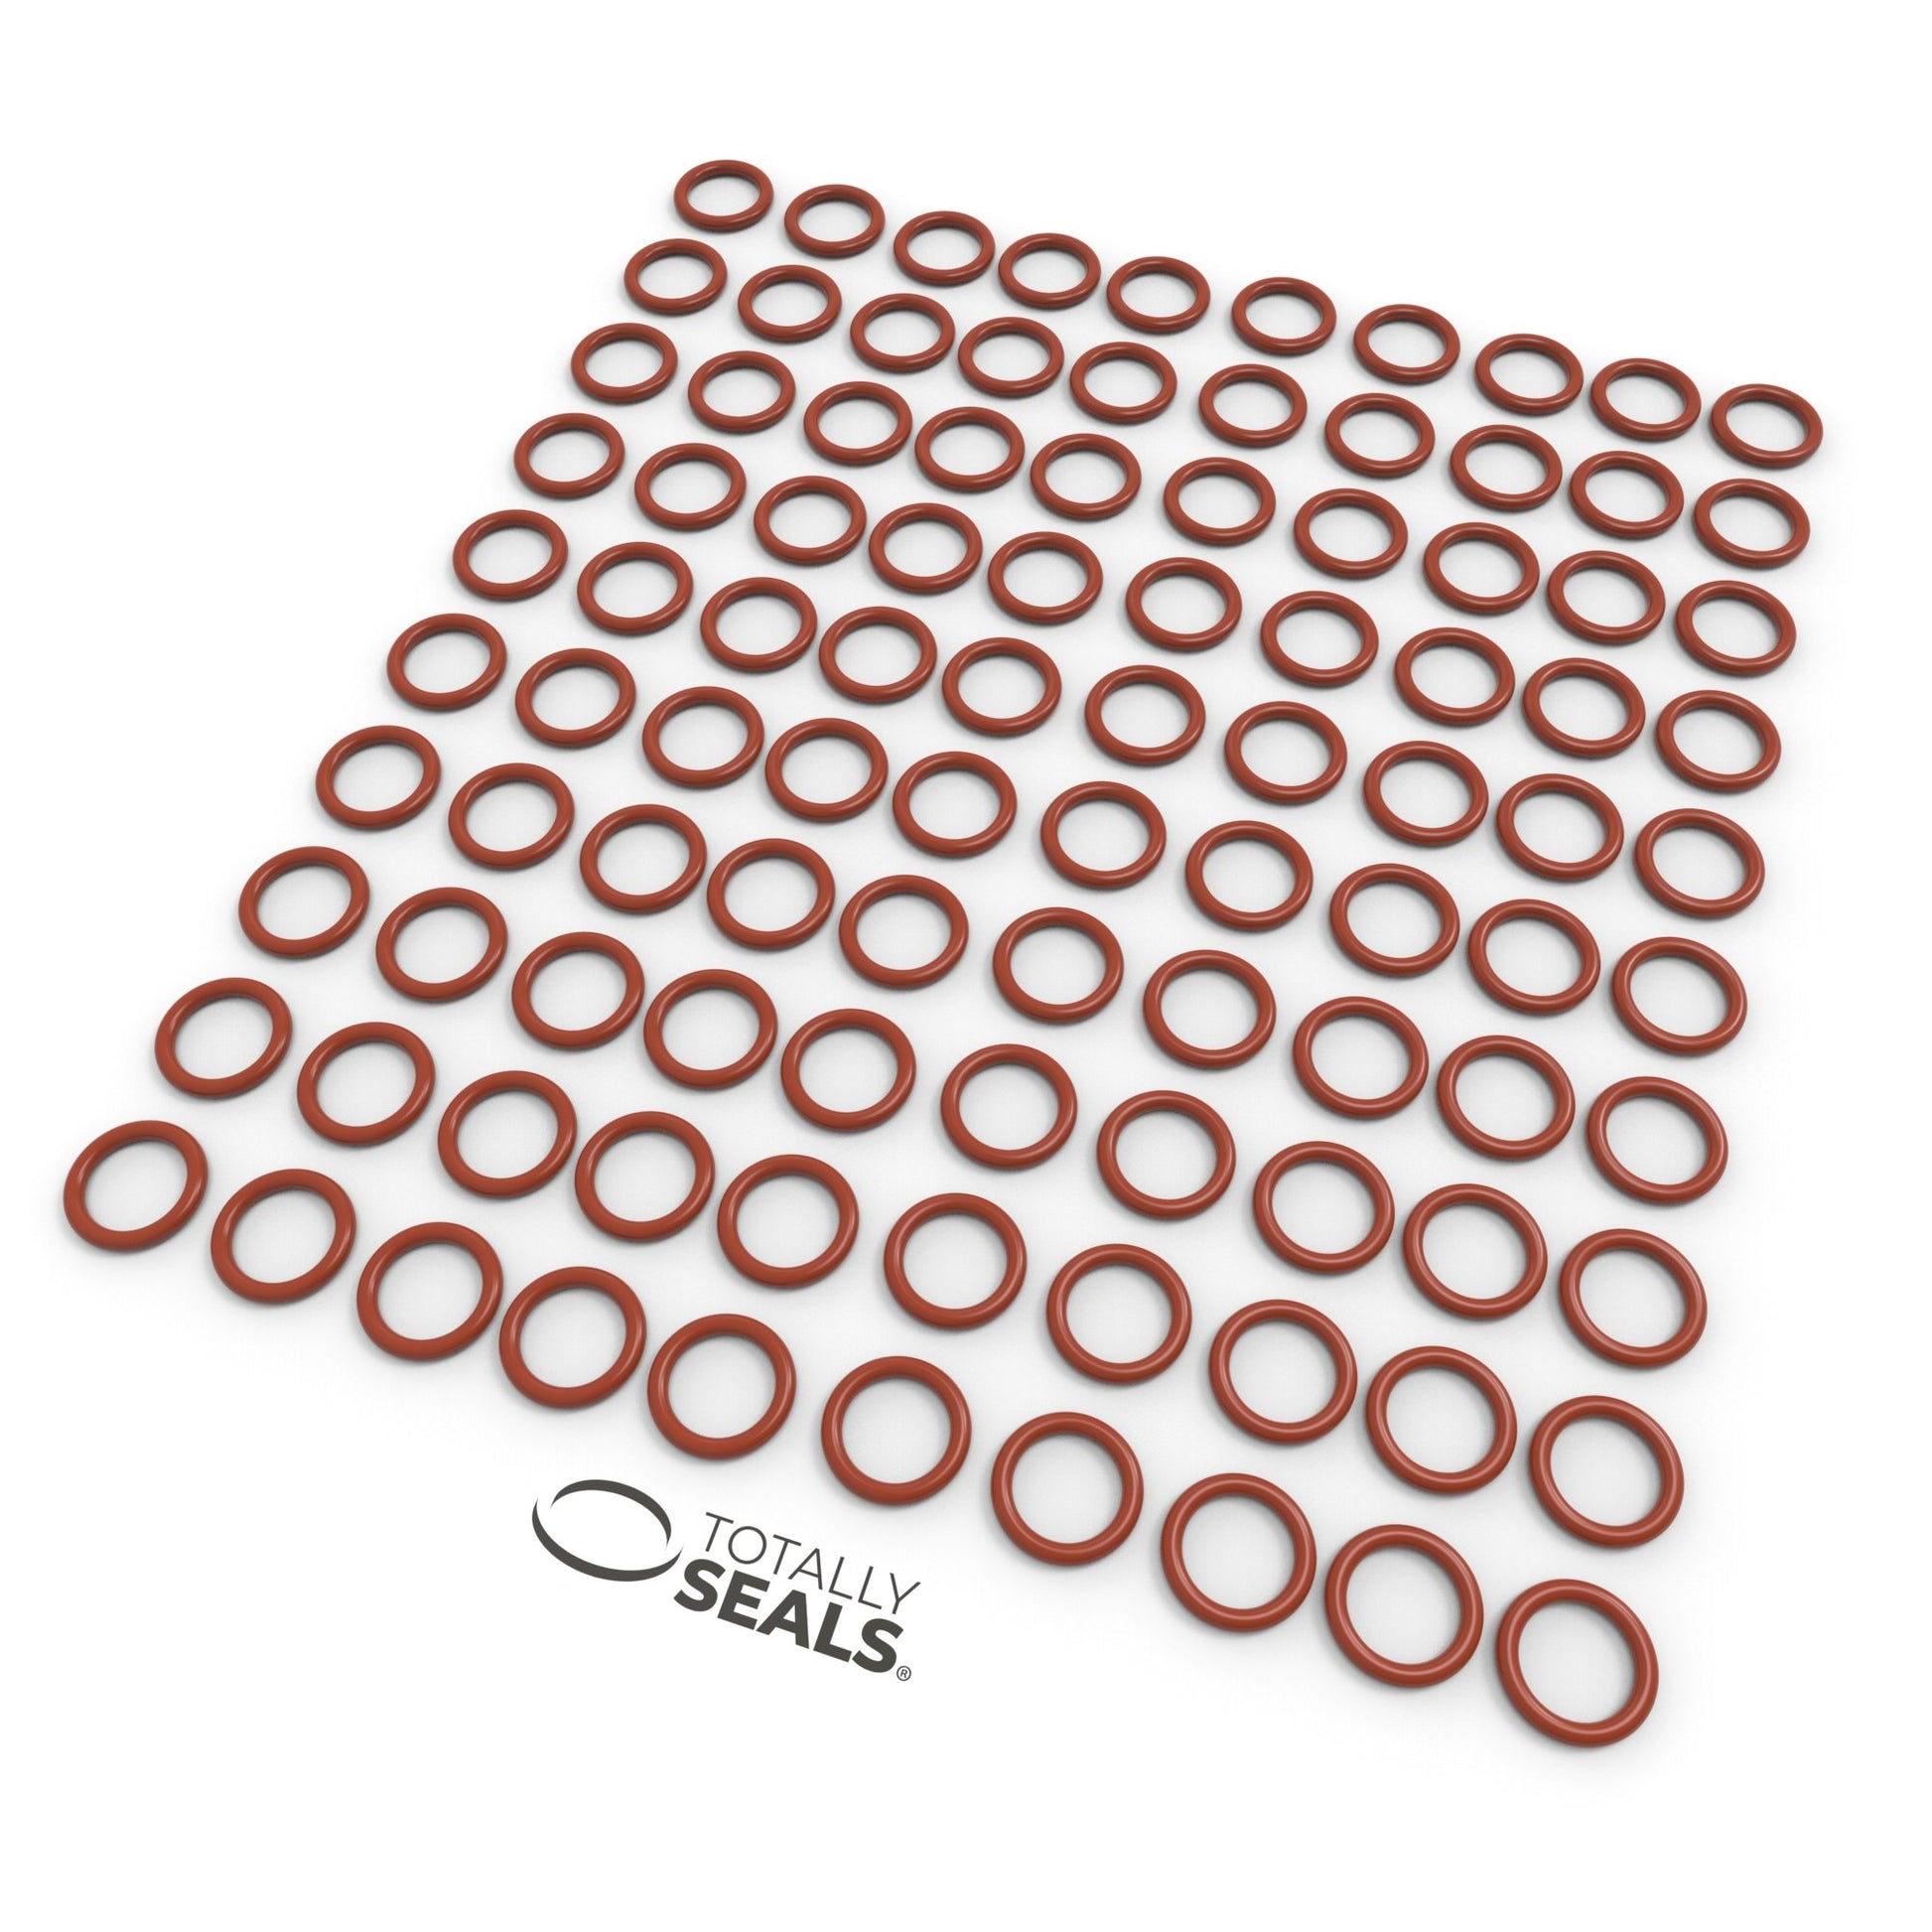 7mm x 2.5mm (12mm OD) Silicone O-Rings - Totally Seals®